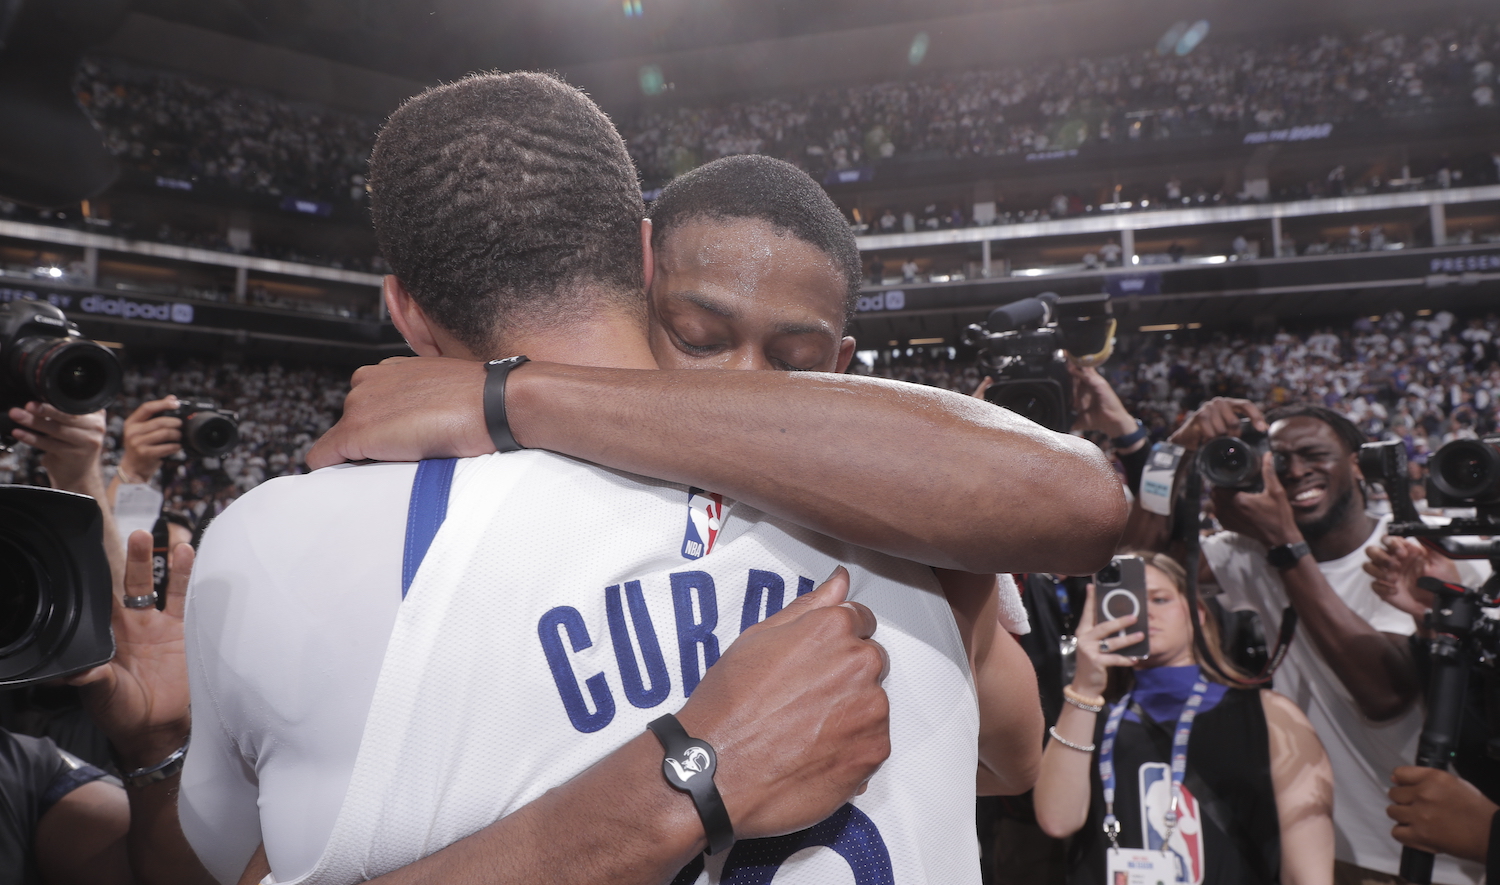 SACRAMENTO, CA - APRIL 30: De'Aaron Fox #5 of the Sacramento Kings embraces Stephen Curry #30 of the Golden State Warriors after Round One Game Seven of the 2023 NBA Playoffs on April 30, 2023 at Golden 1 Center in Sacramento, California. NOTE TO USER: User expressly acknowledges and agrees that, by downloading and or using this Photograph, user is consenting to the terms and conditions of the Getty Images License Agreement. Mandatory Copyright Notice: Copyright 2023 NBAE (Photo by Rocky Widner/NBAE via Getty Images)